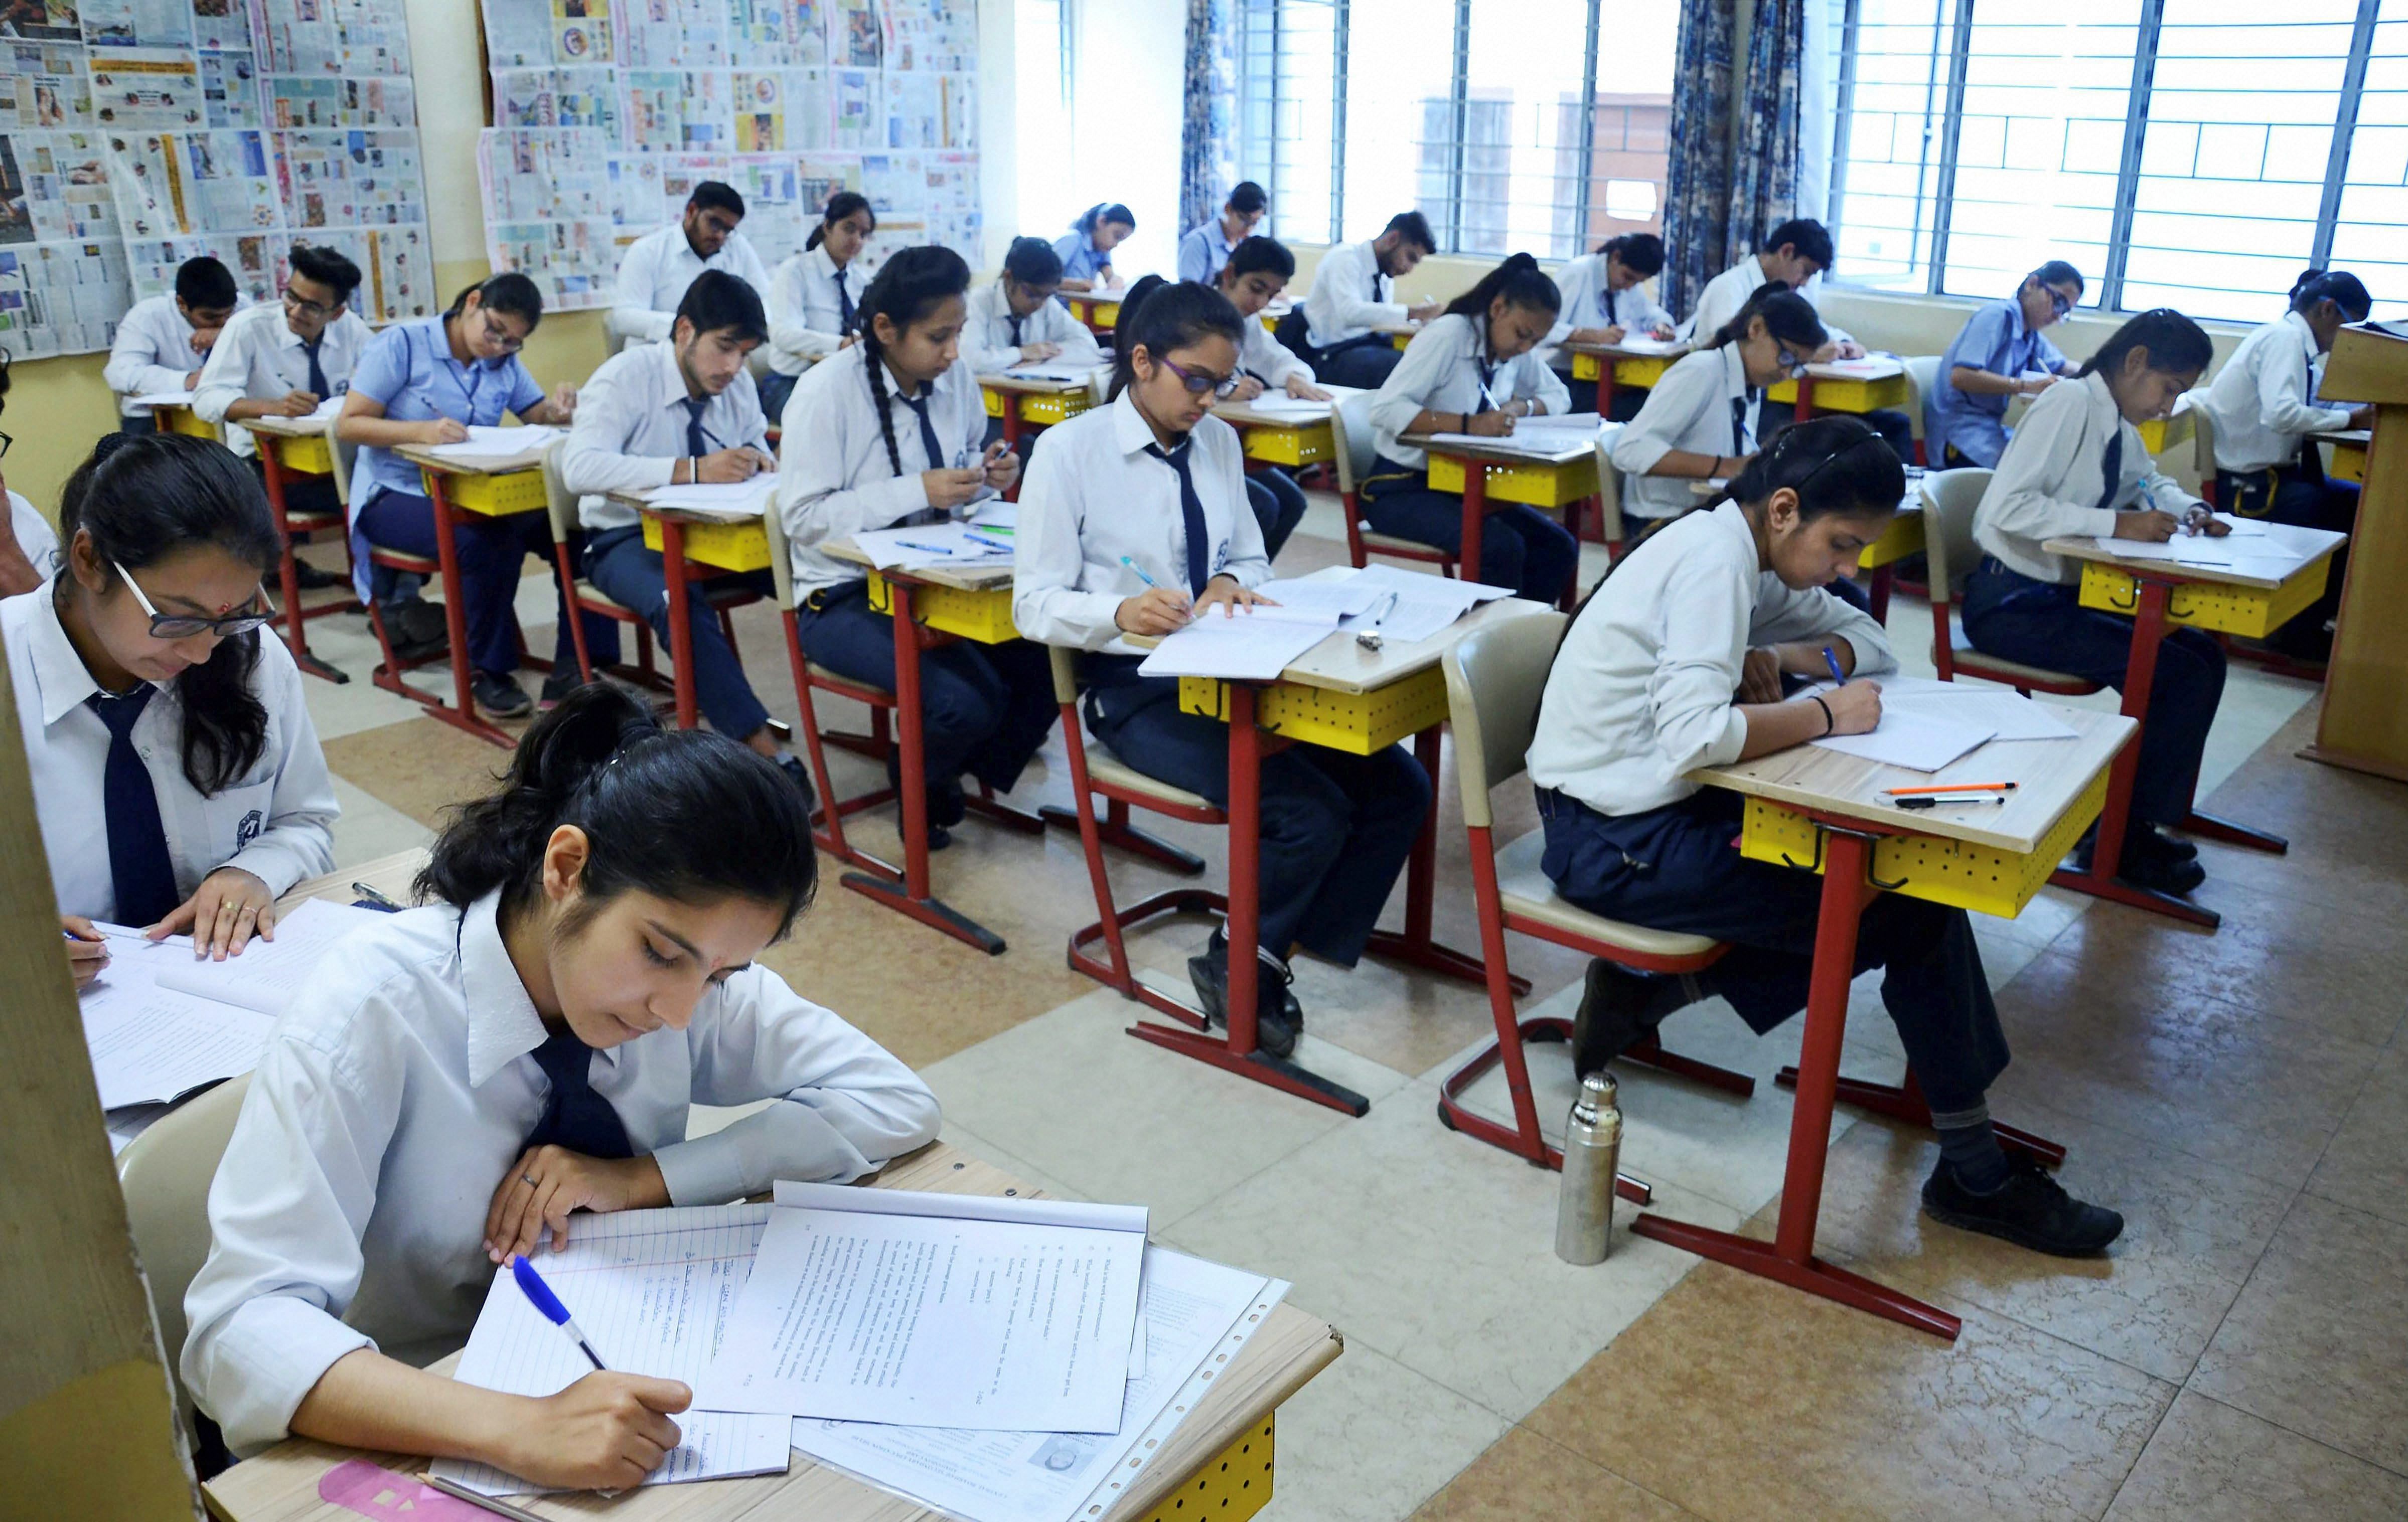 The opposition outcry came after the Central Board of Secondary Education (CBSE) decided to cut the syllabus for Classes IX to XII by 30% in view of the closure of schools due to the Covid-19 pandemic.